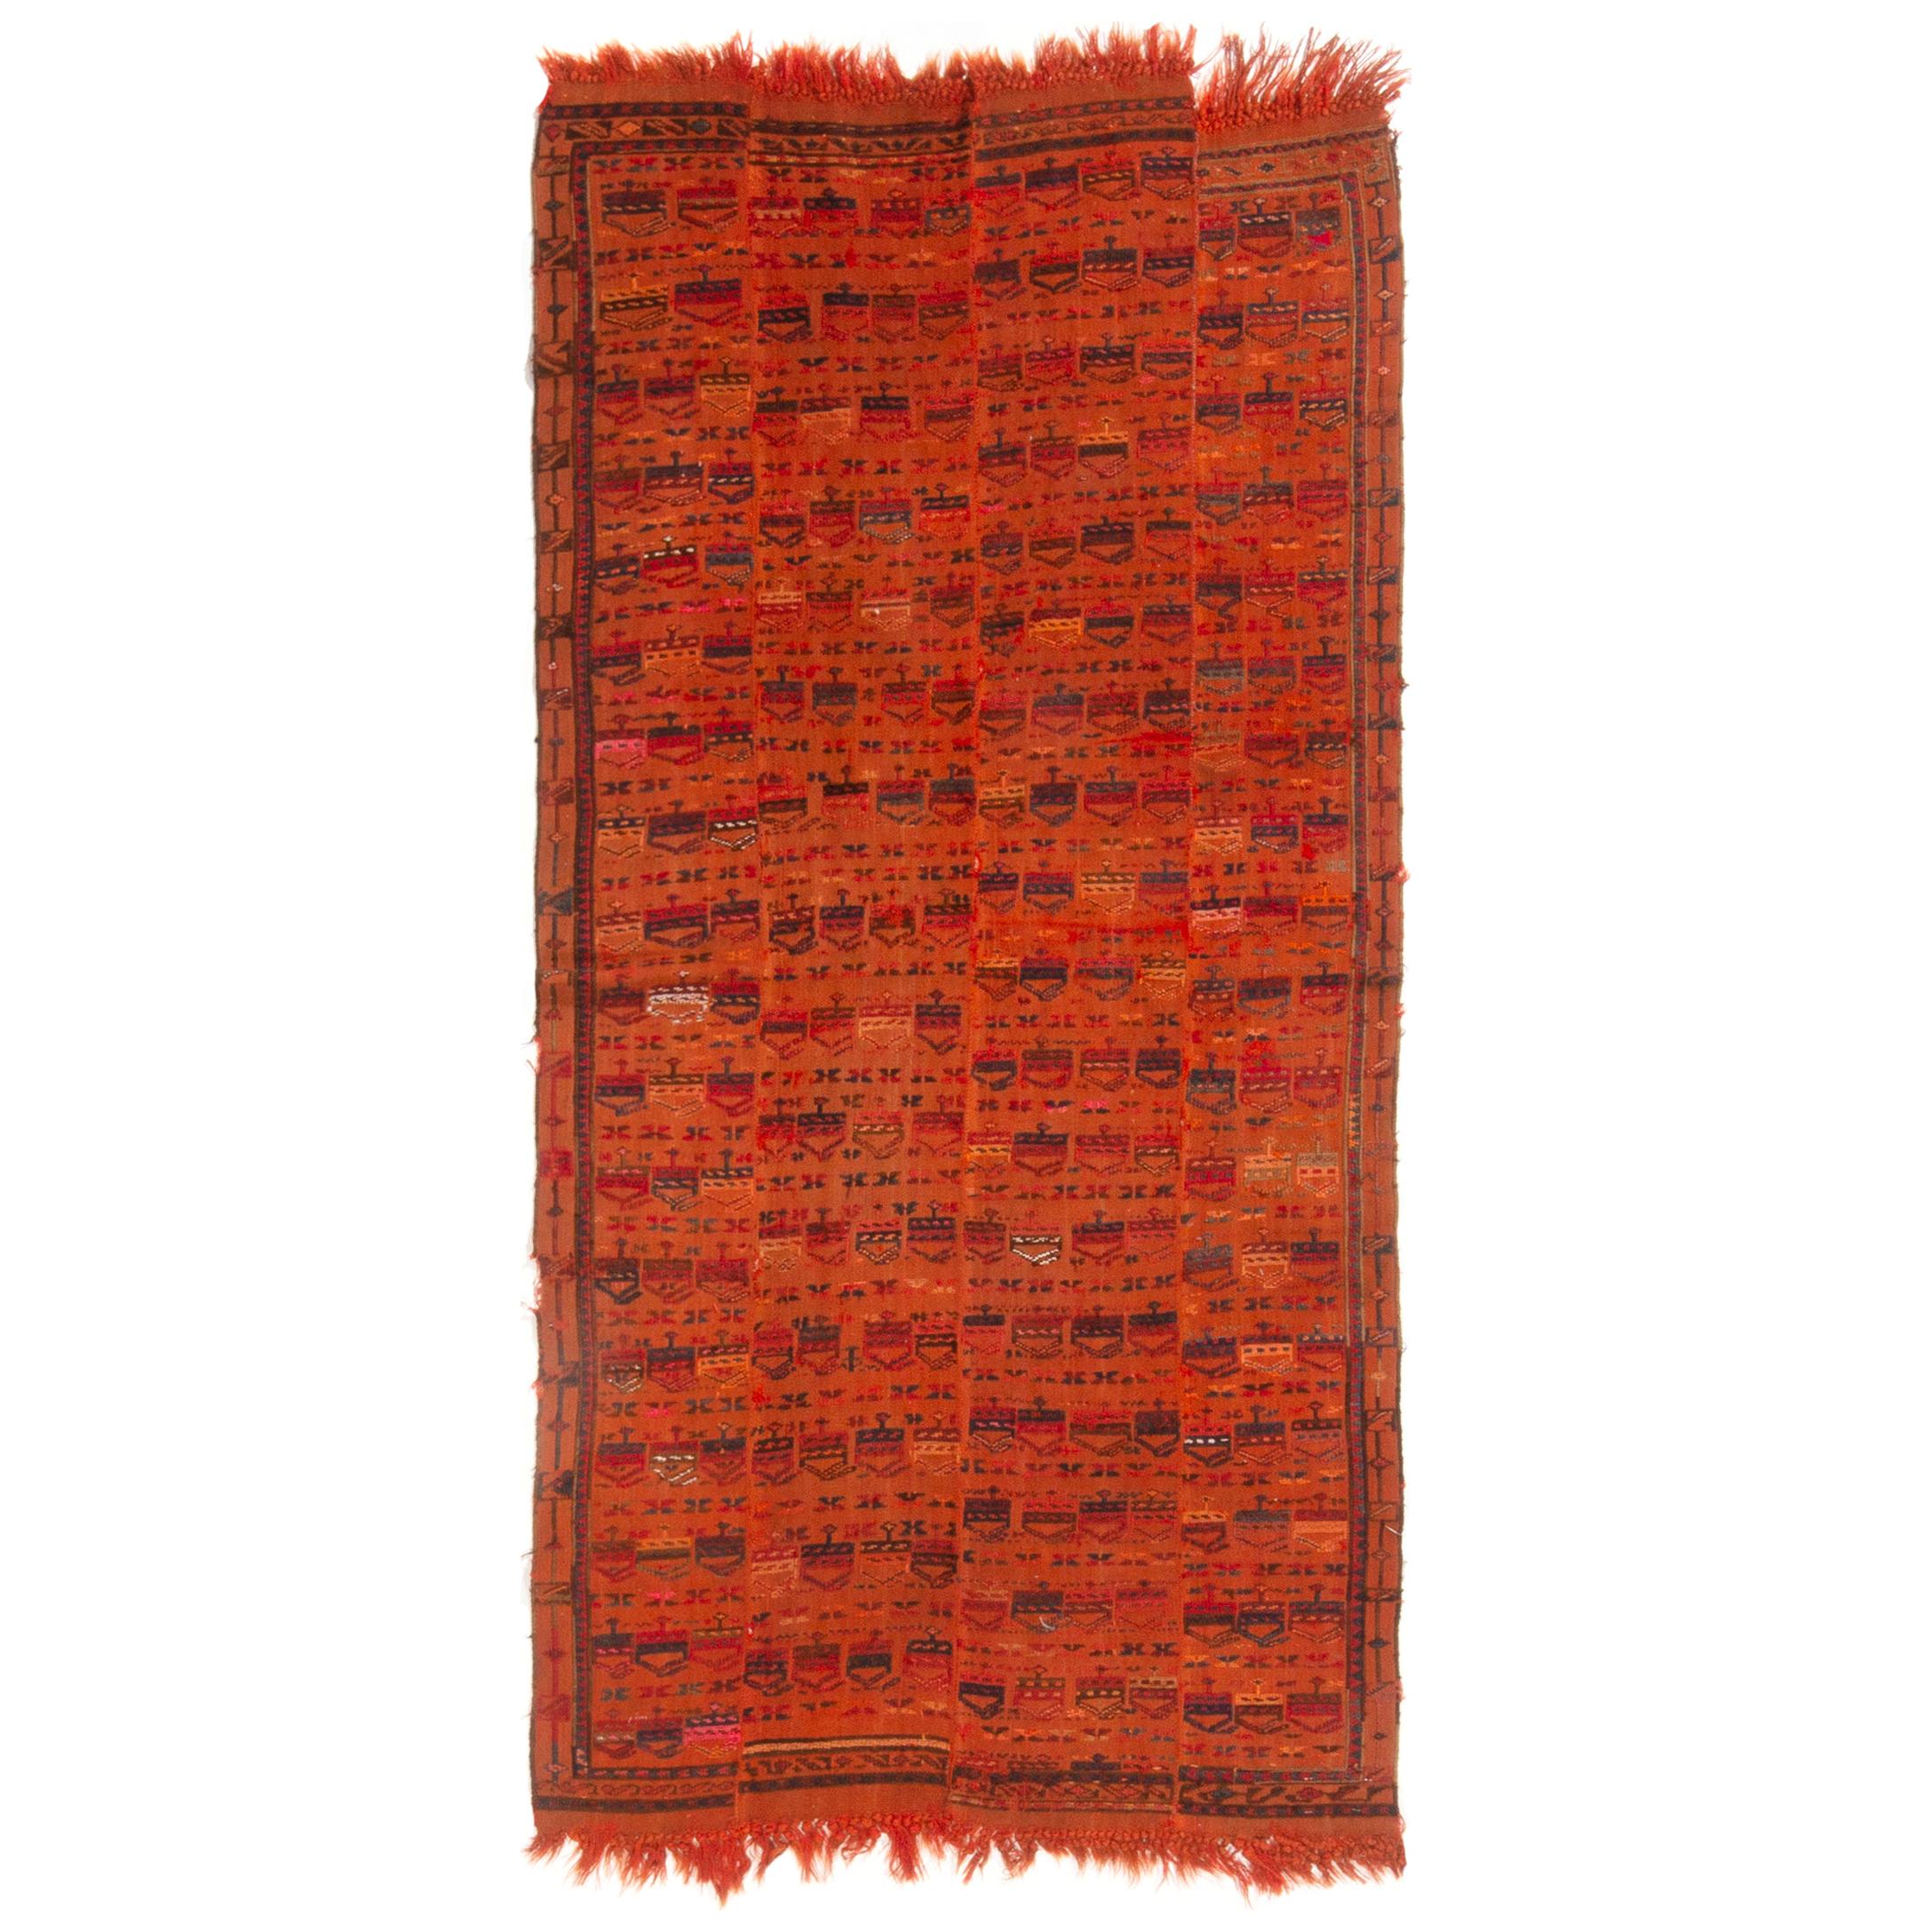 Antique Verneh Traditional Orange and Red Wool Kilim Rug